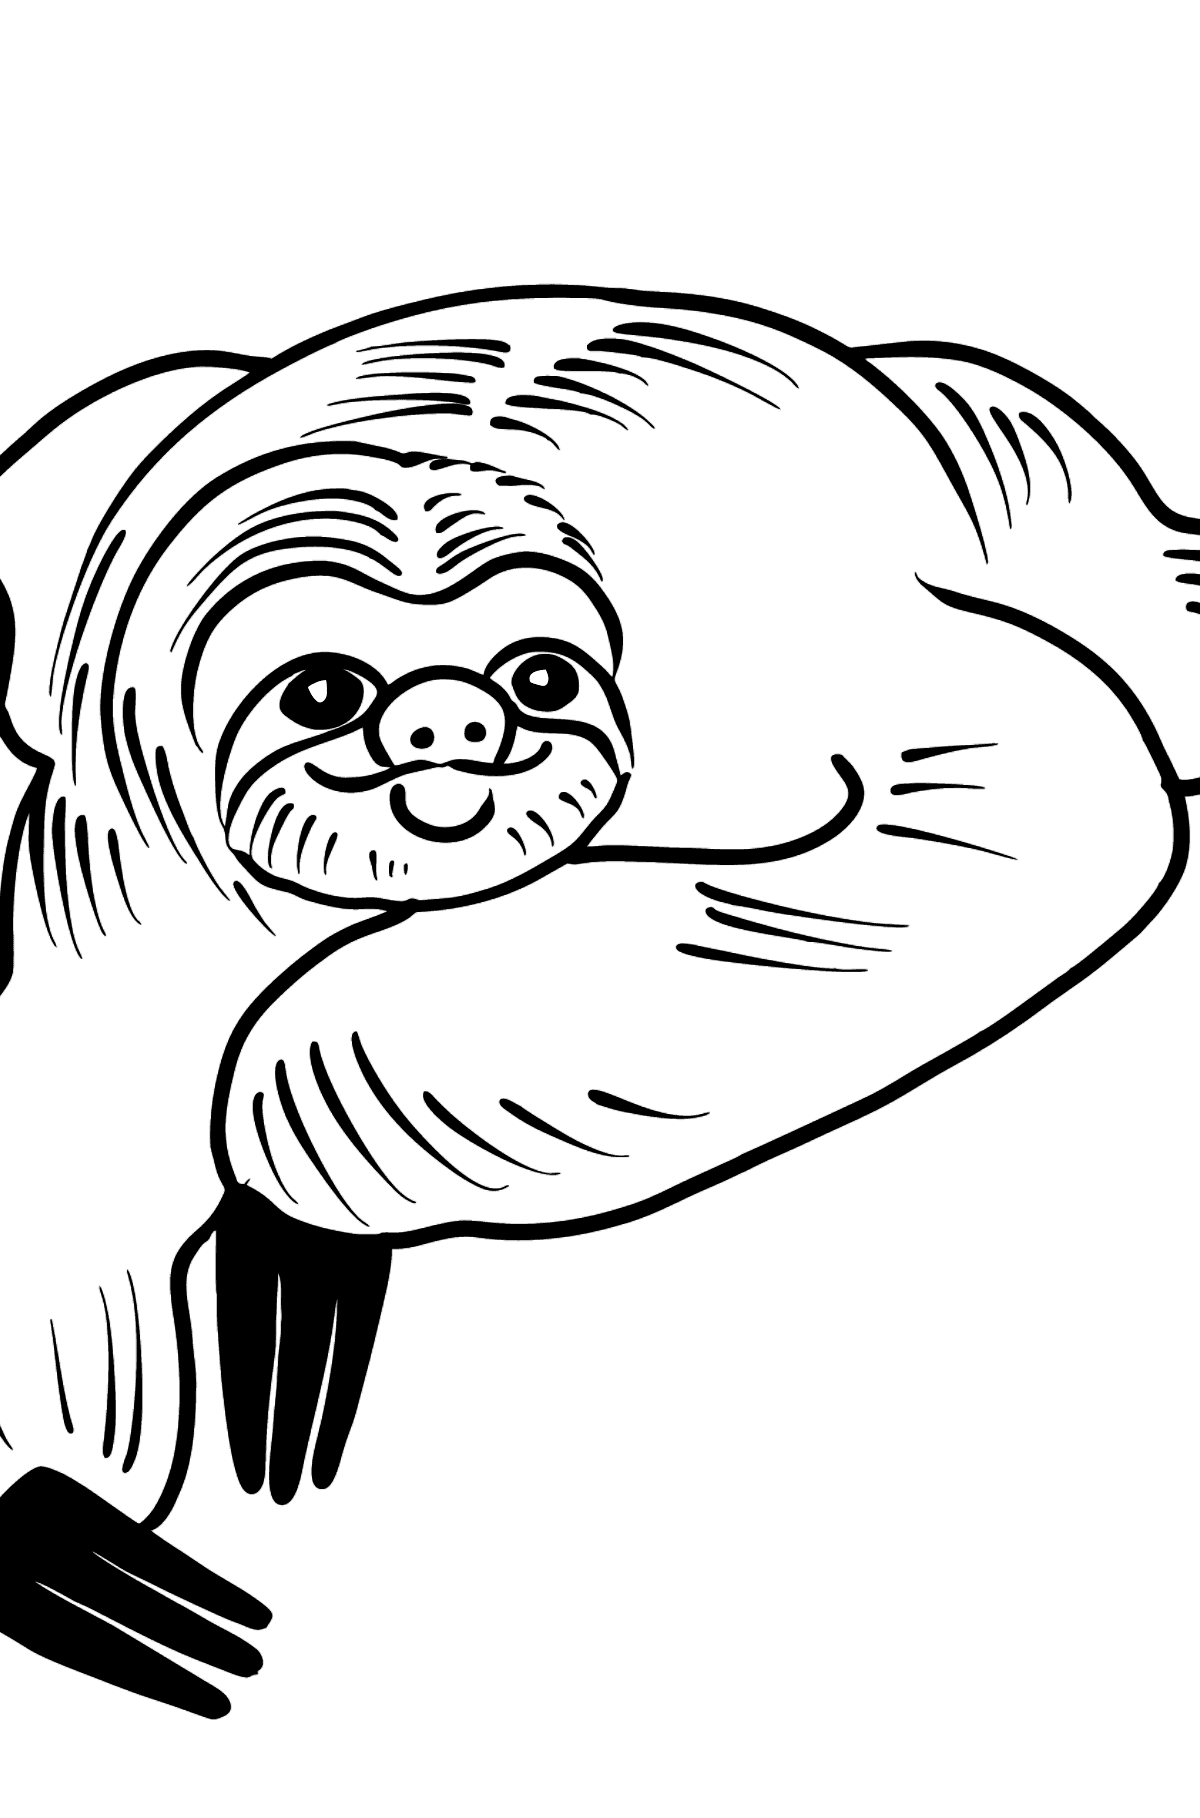 Sloth coloring page - Coloring Pages for Kids